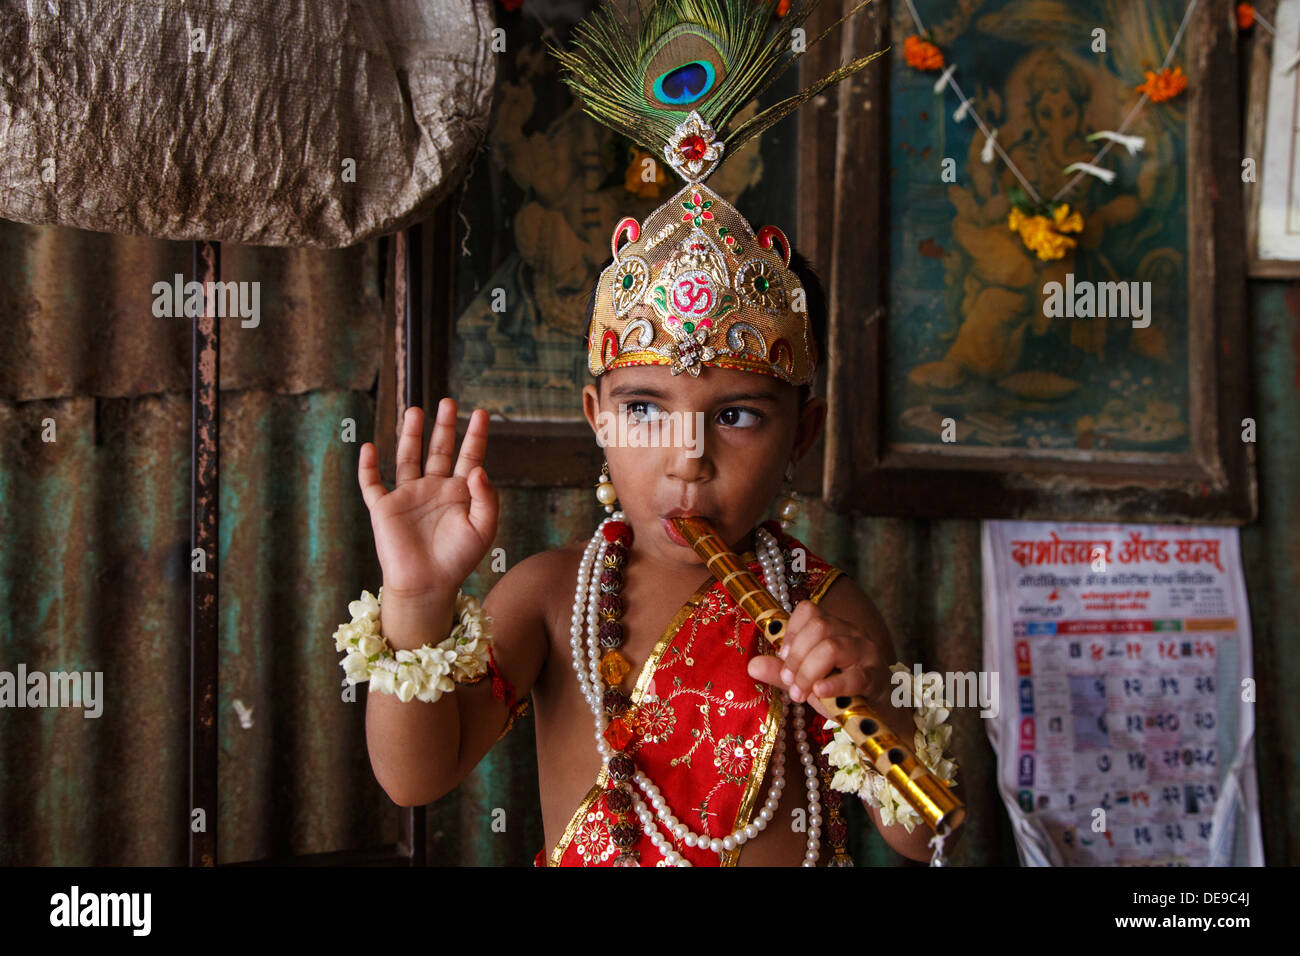 A young child dressed as Lord Krishna during Janmashtami festival in Dadar area of Mumbai, India. Stock Photo